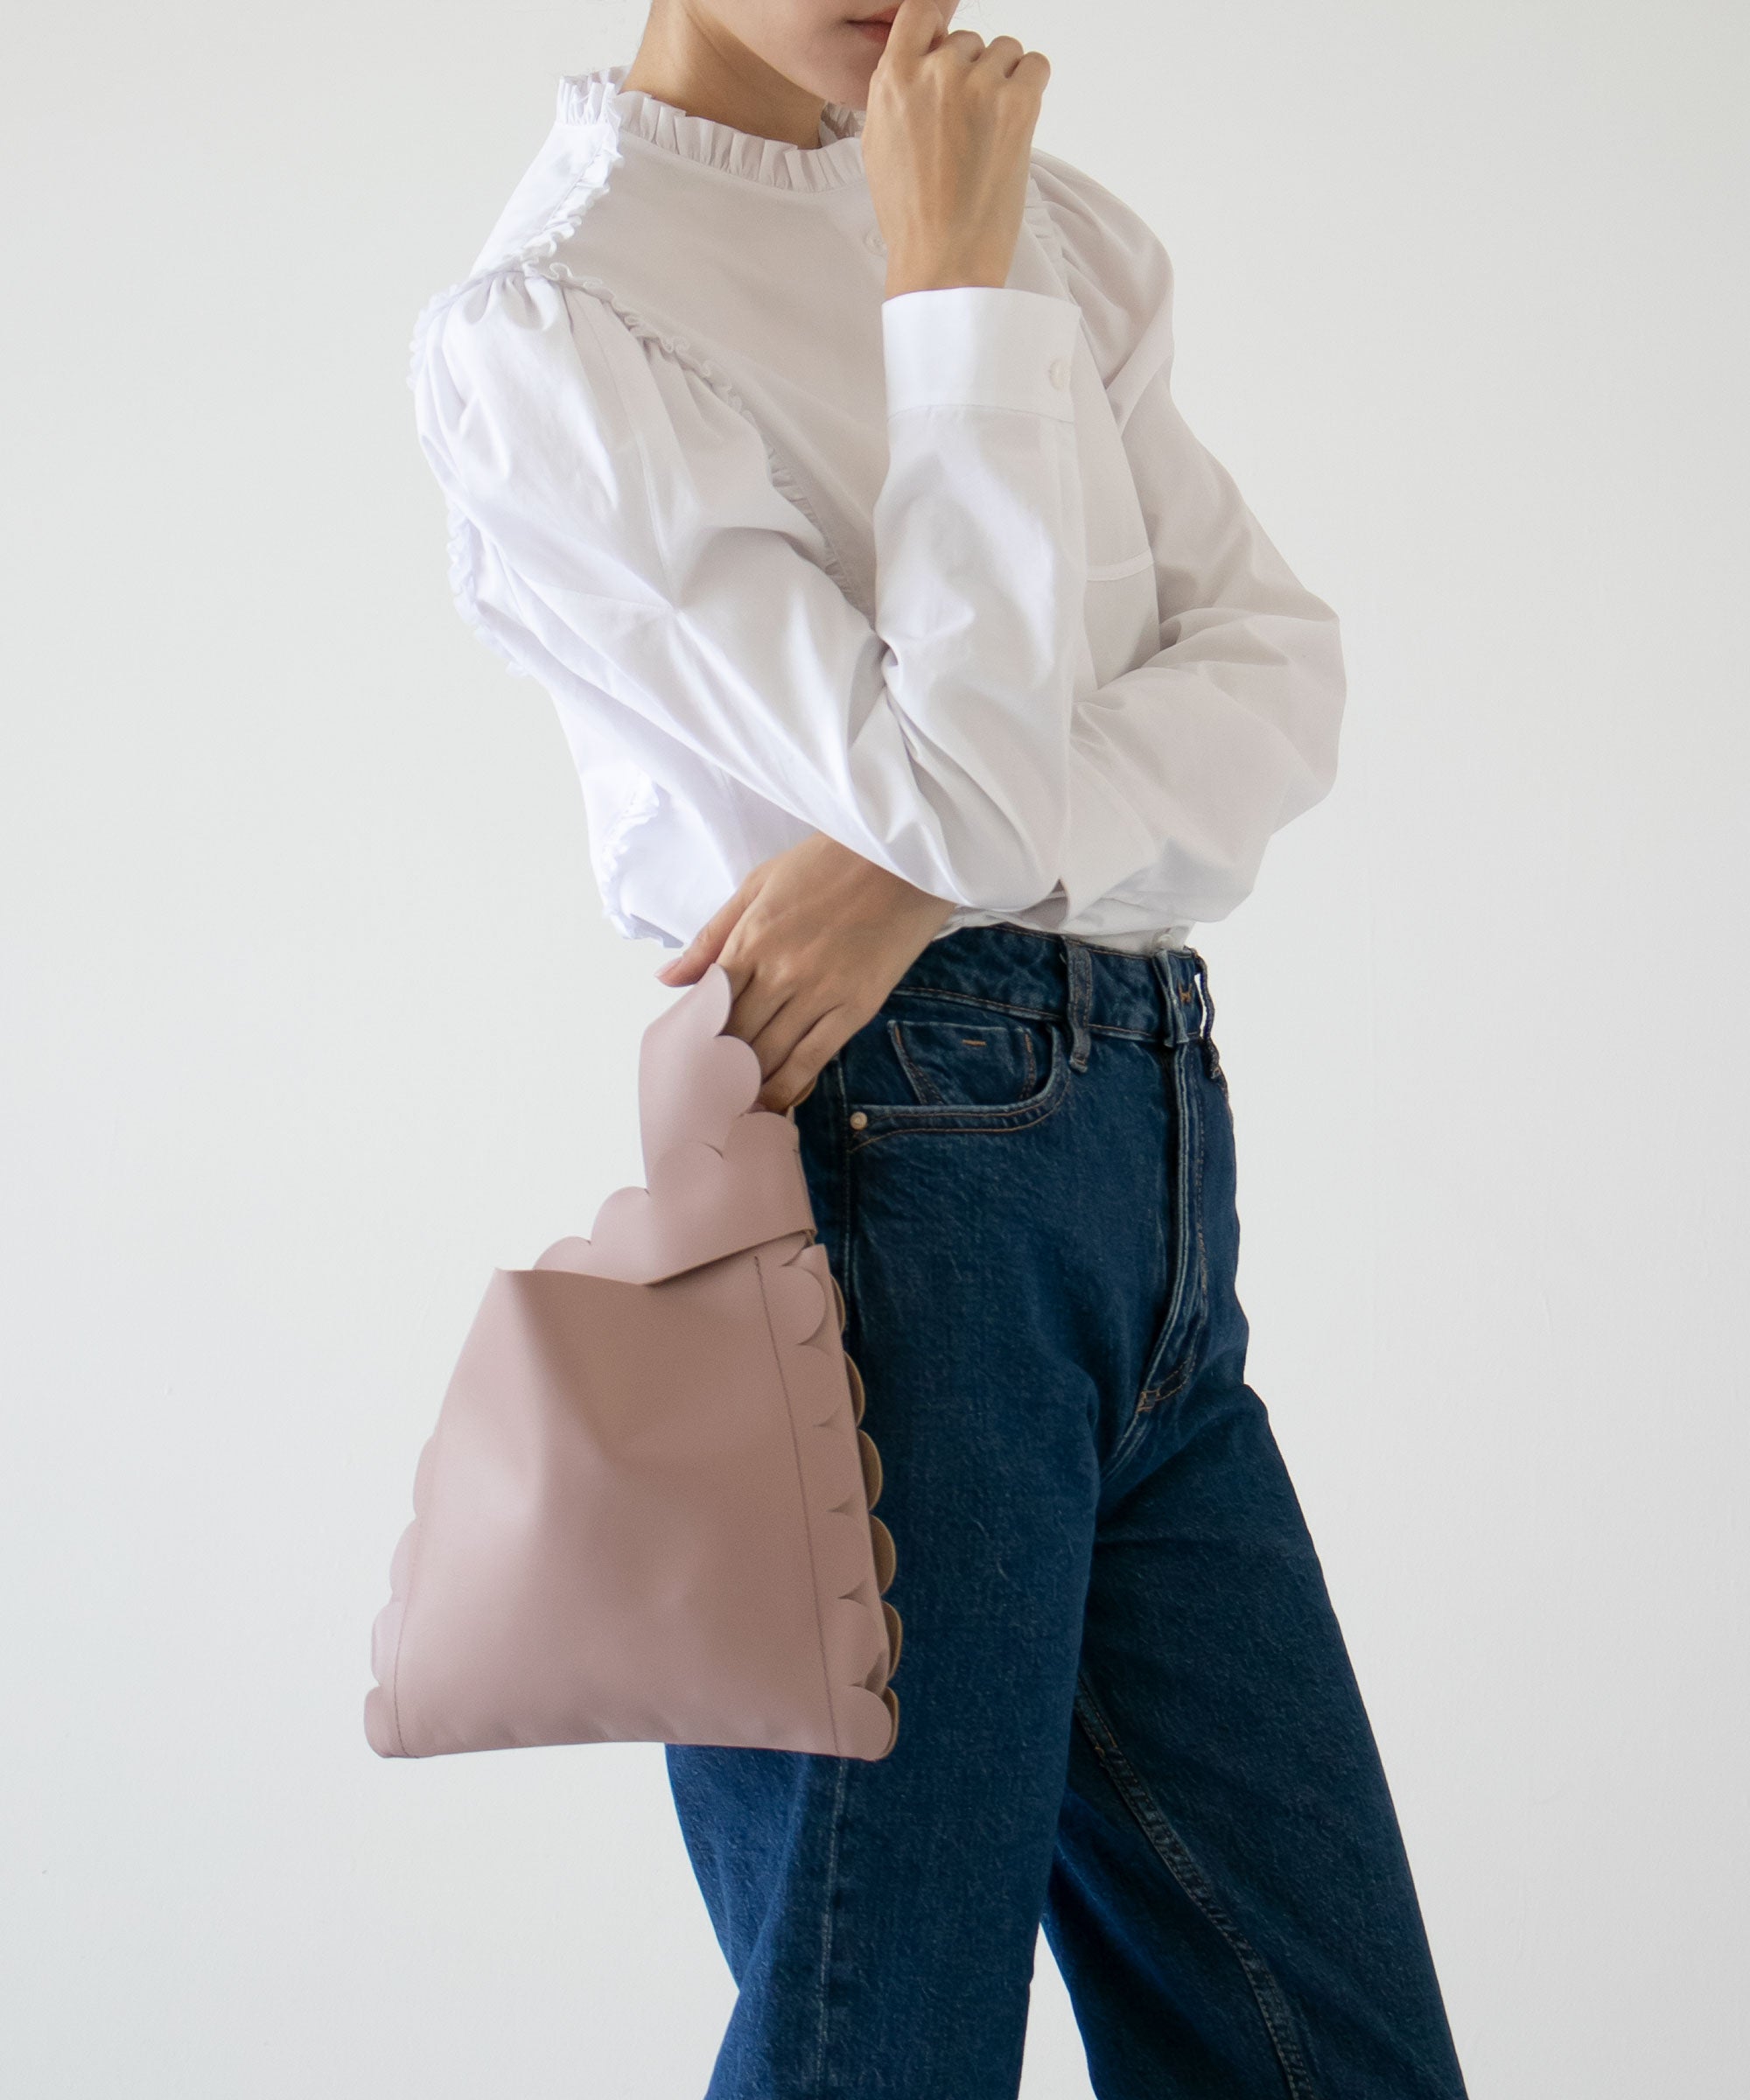 Scalloped leather shopping bag— LUDLOW STORE